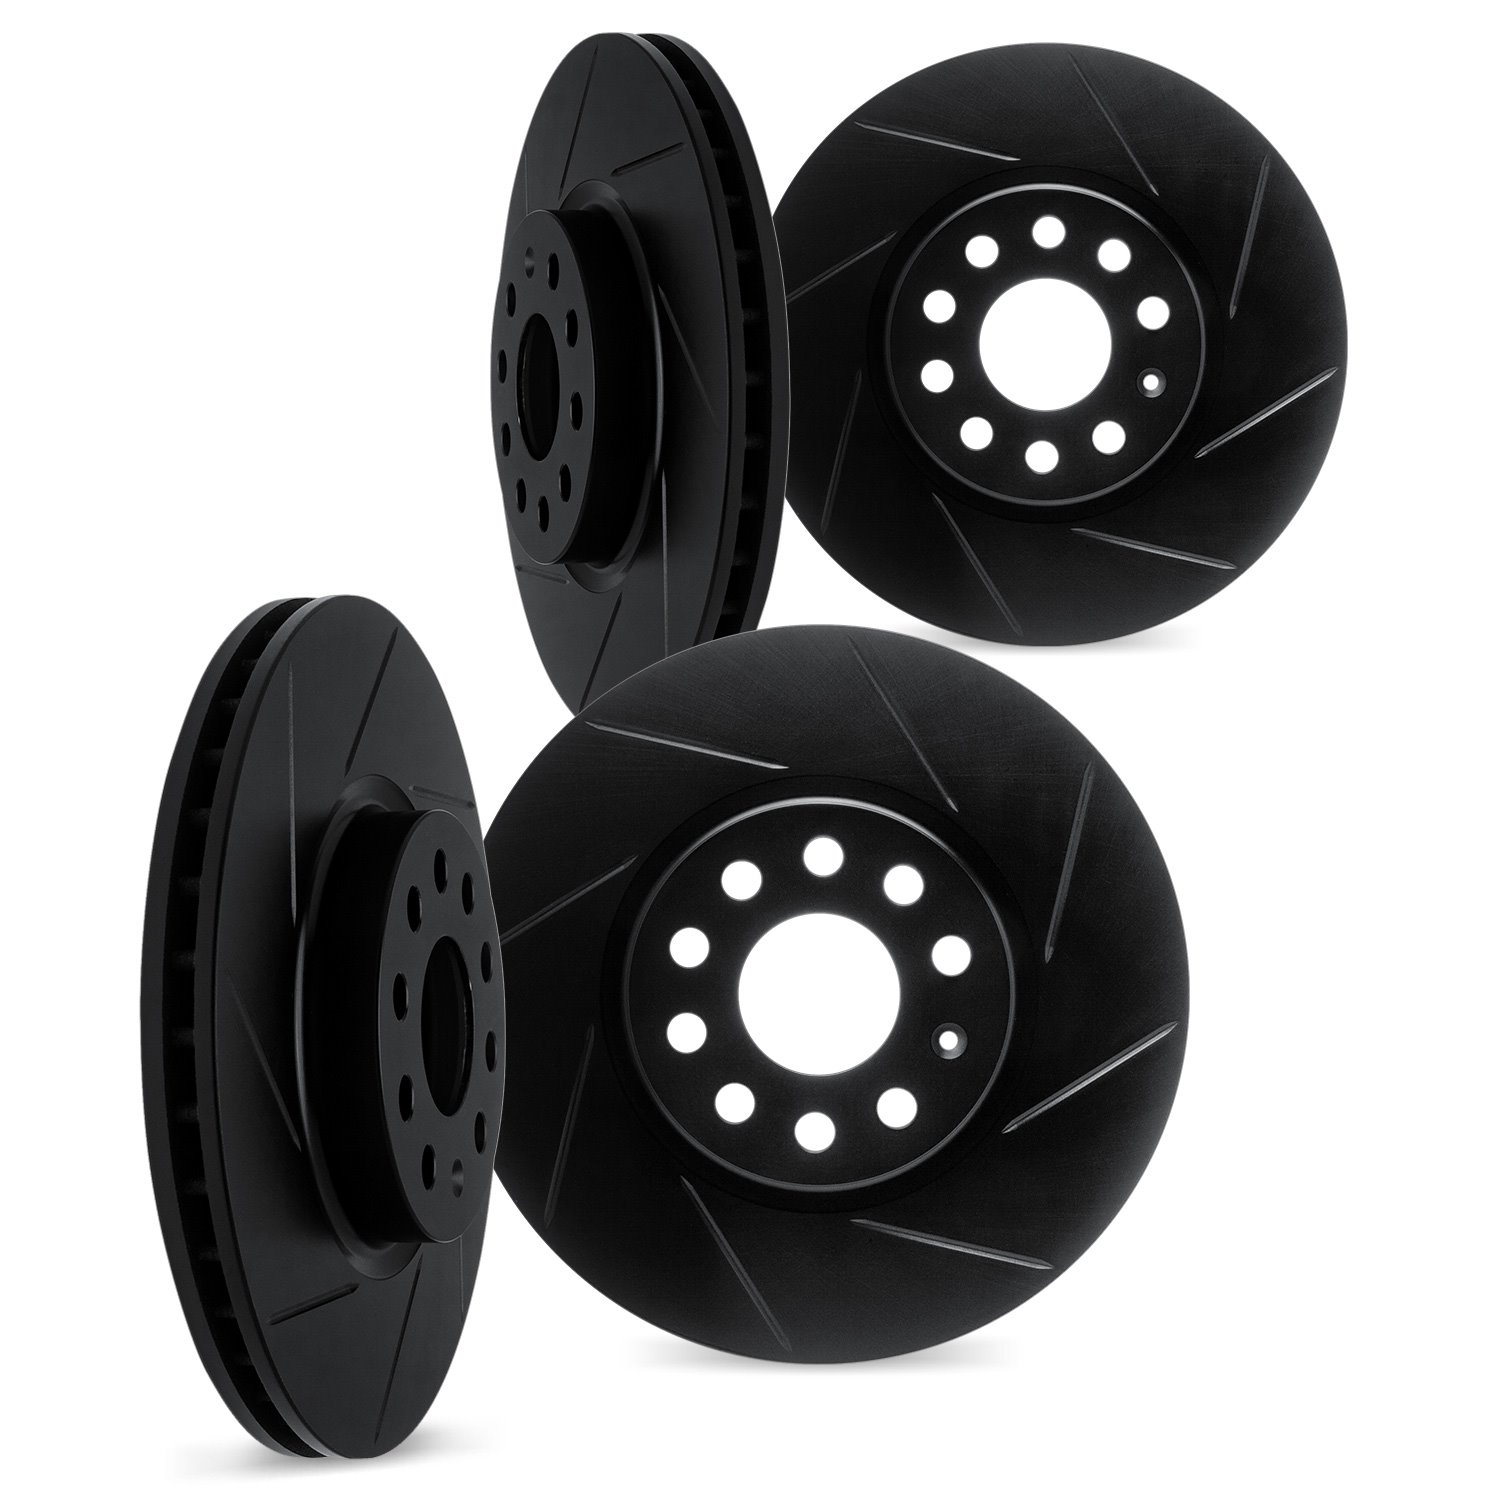 3004-11010 Slotted Brake Rotors [Black], Fits Select Multiple Makes/Models, Position: Front and Rear